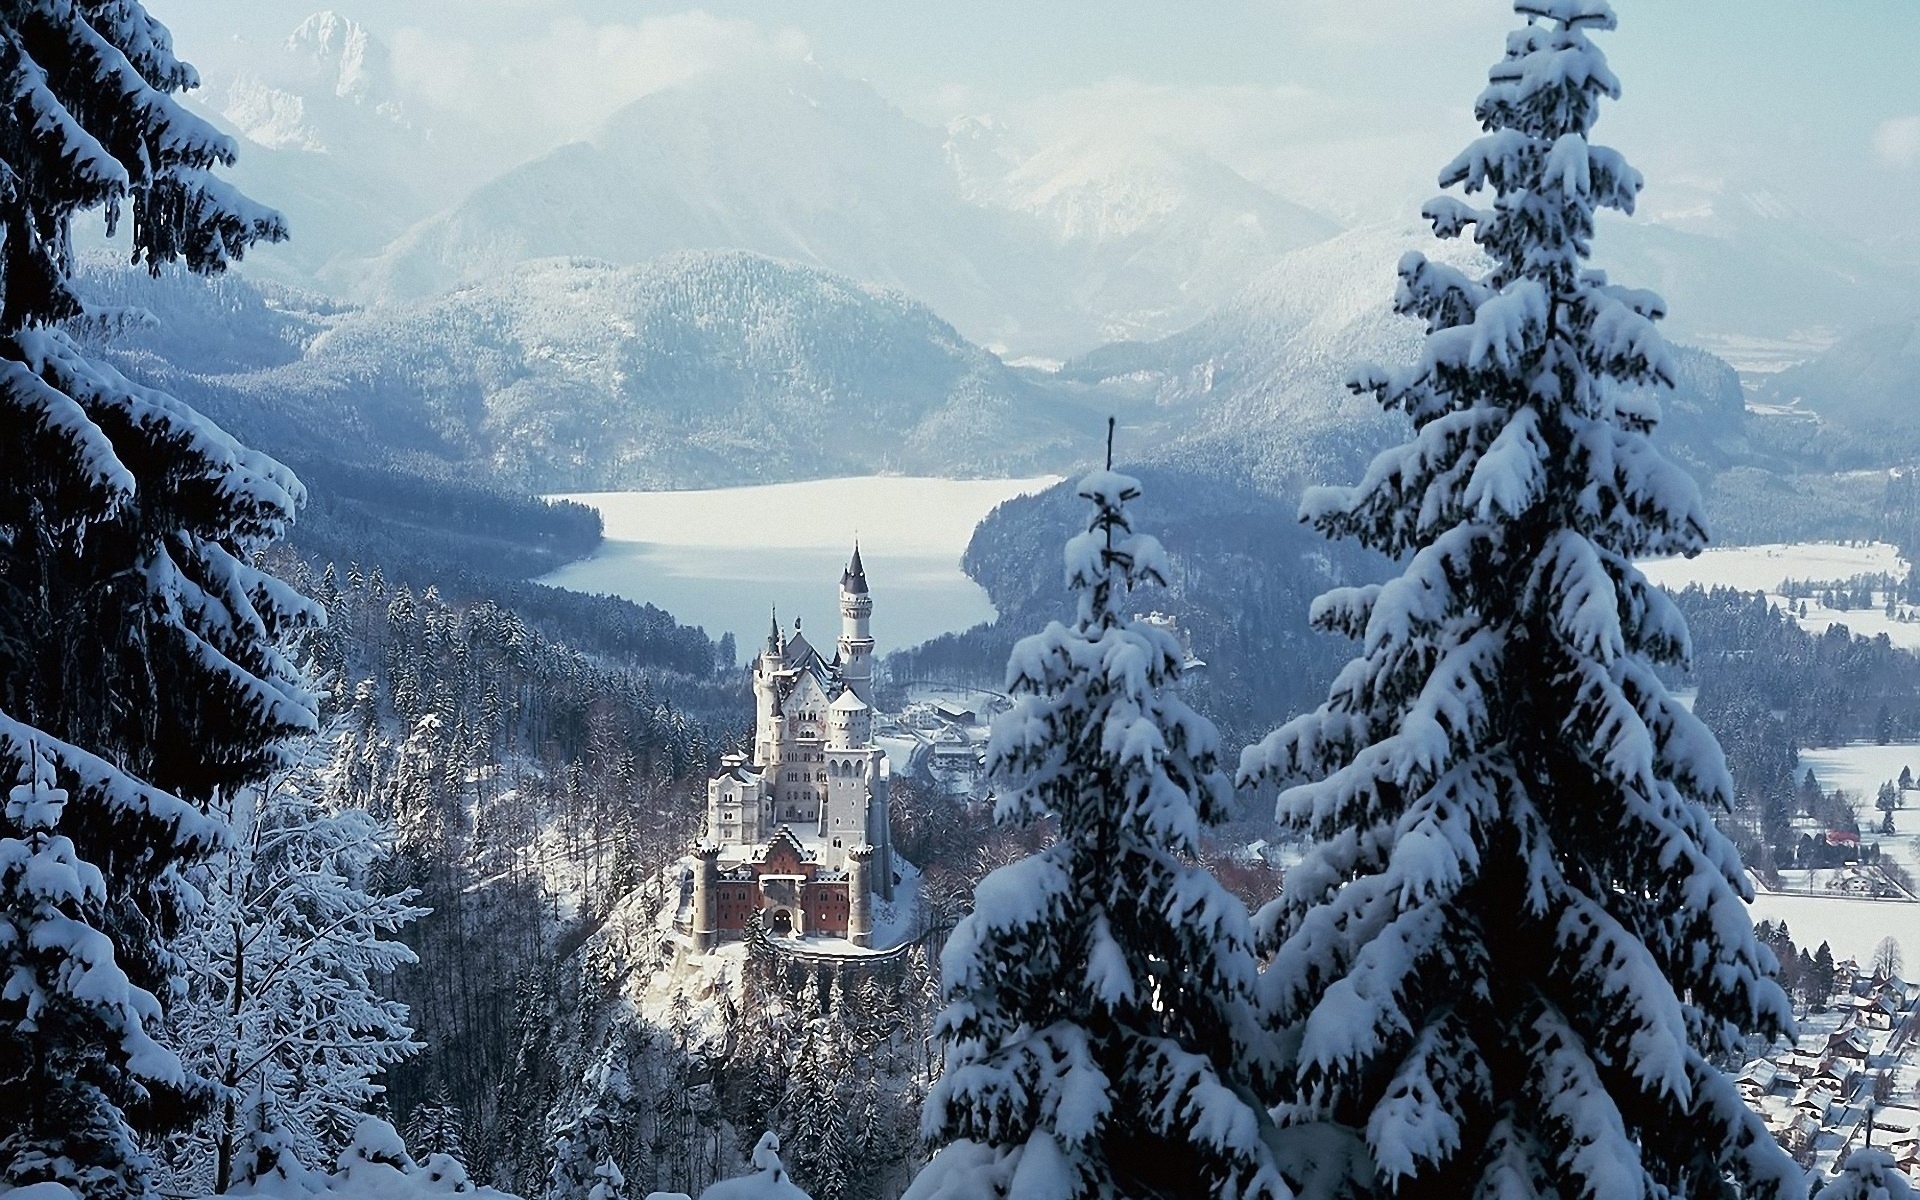 neuschwanstein, Castle, Winter, Germany, Bavaria, Castle, Bavaria, Architecture, Buildings, Tower, Nature, Landscapes, Trees, Forest, Wood, Lakes, Winter, Snow, Seasons, Mountains, Haze, Scenic Wallpaper